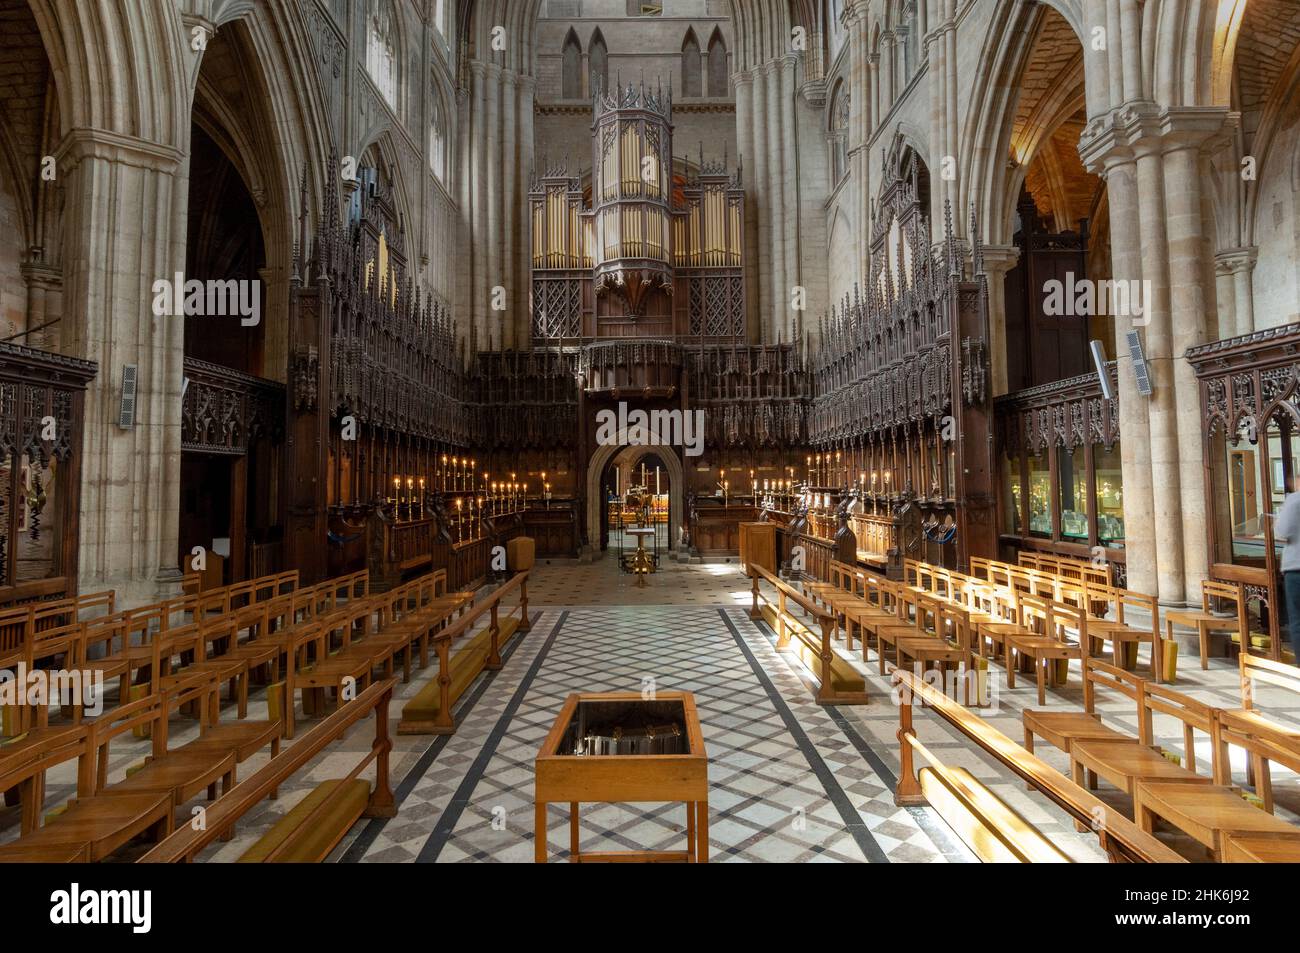 The Cathedral Church of St Peter and St Wilfrid - Ripon Cathedral - North Yorkshire, England, UK - interior view Stock Photo